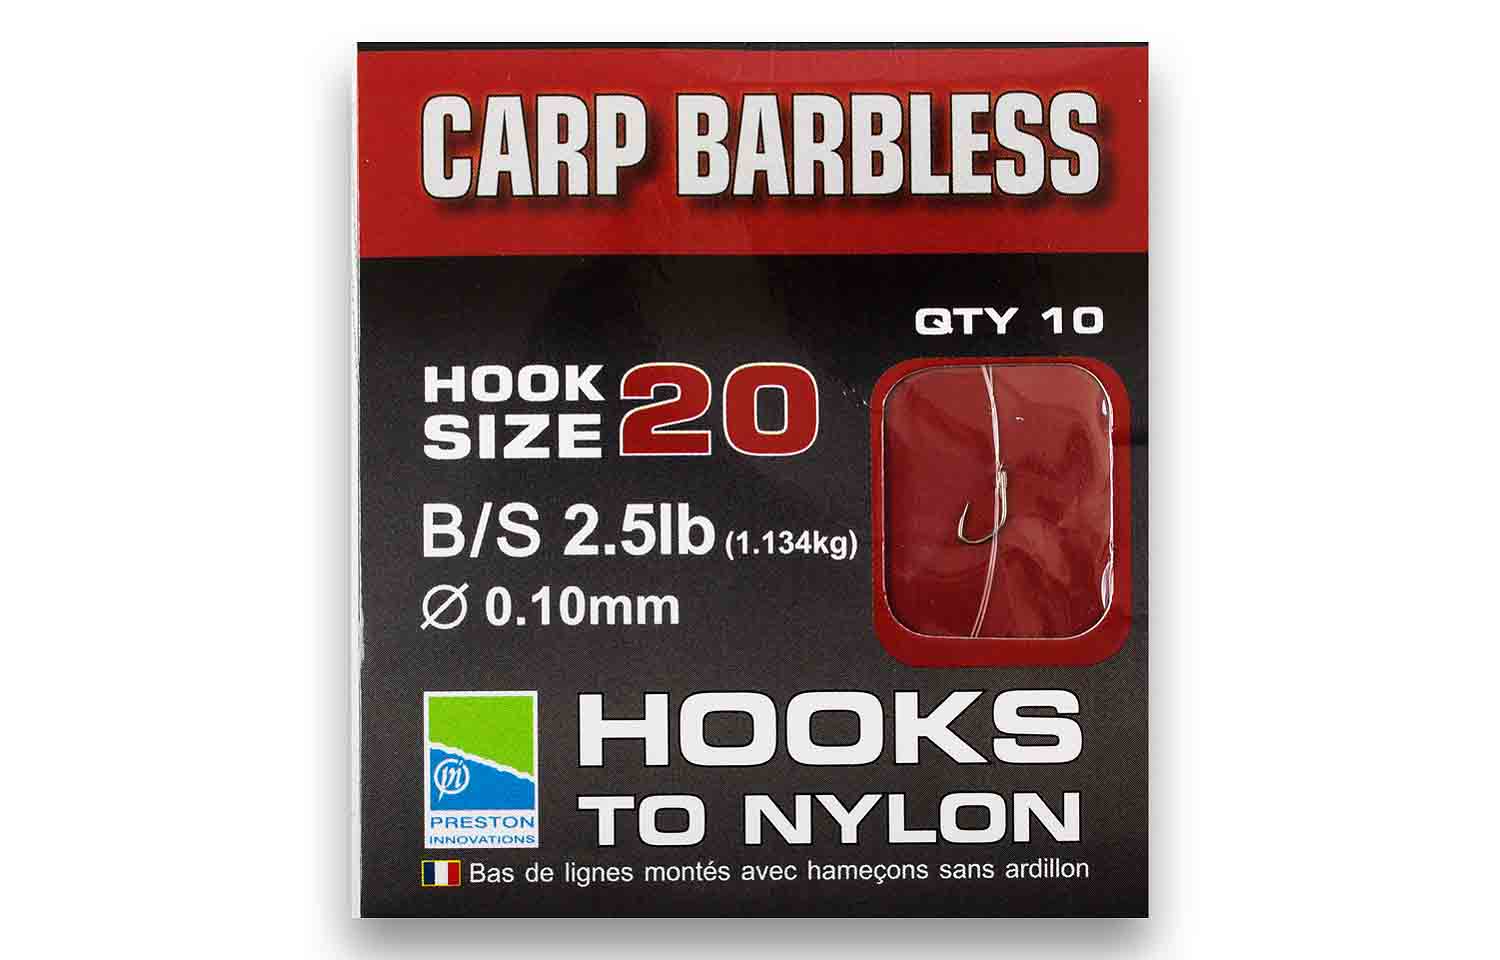 Image of CARP BARBLESS HOOKS TO NYLON by  Innovations